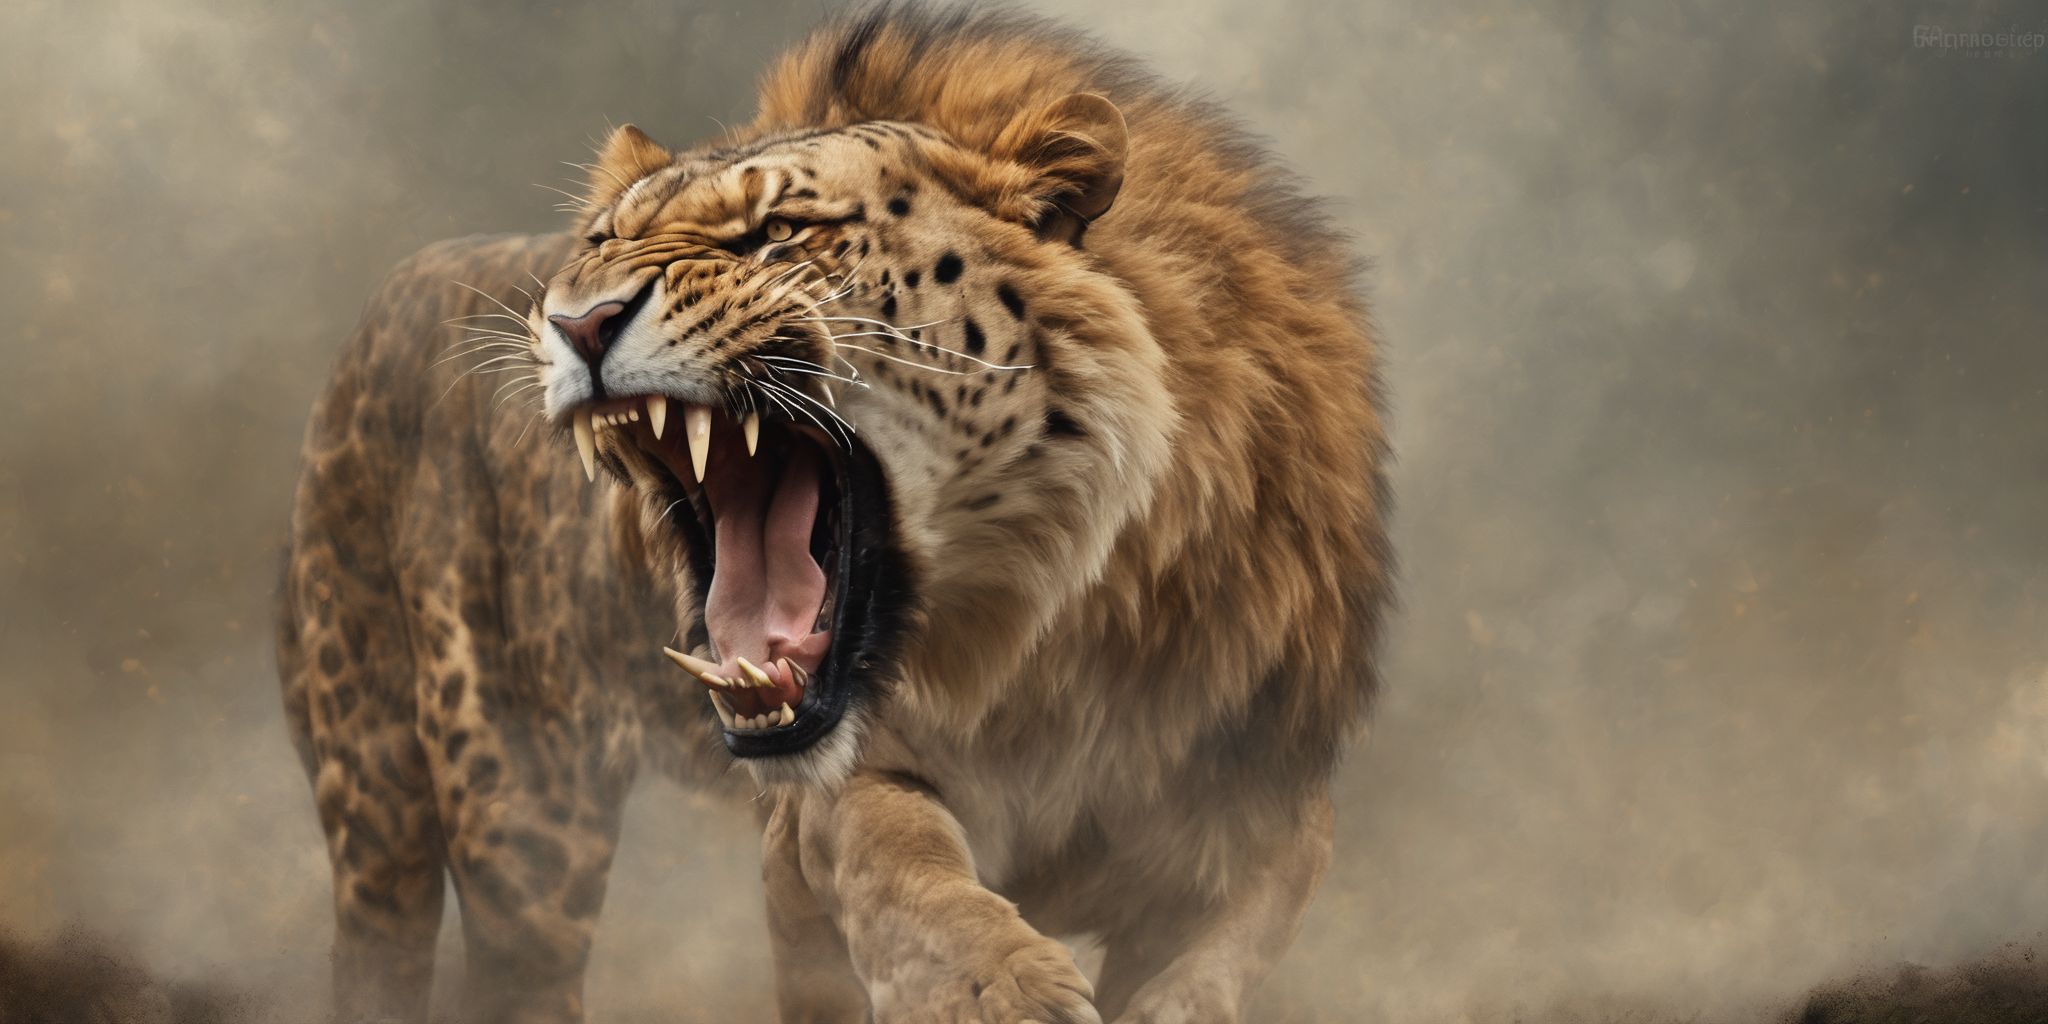 Roar  in realistic, photographic style